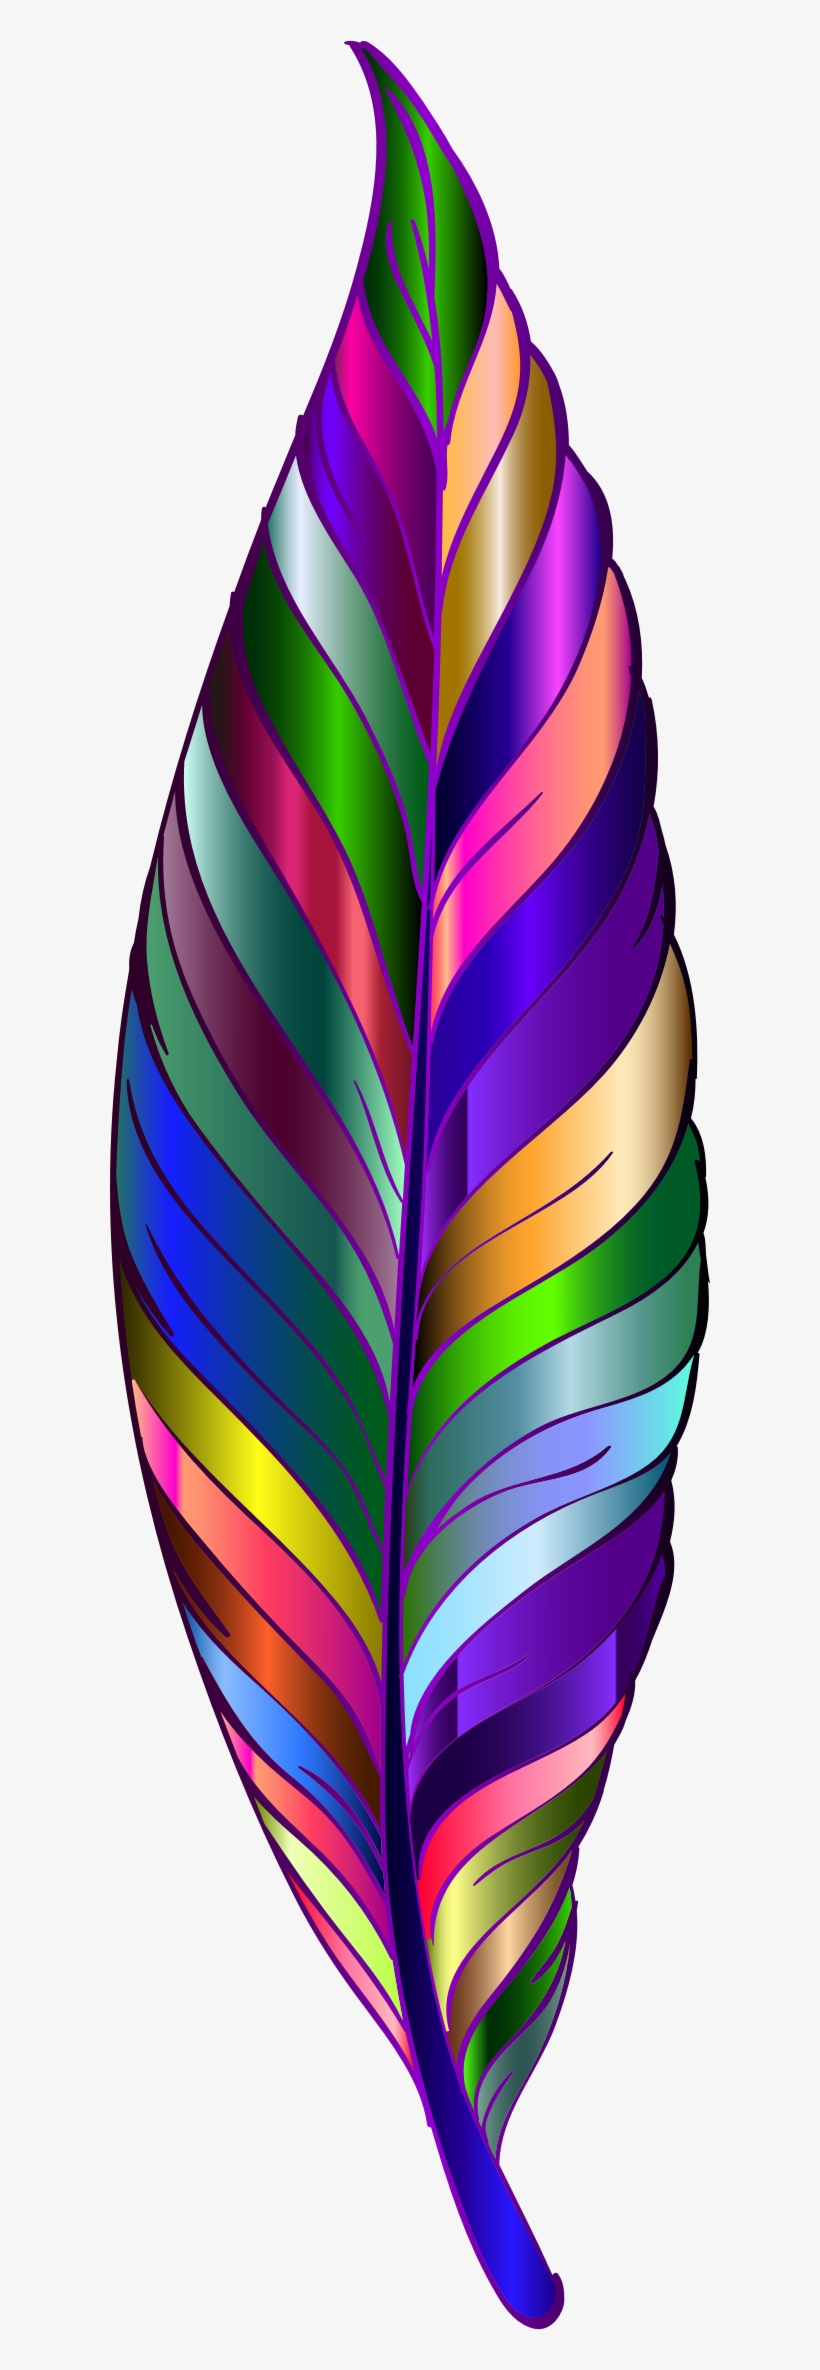 This Free Icons Png Design Of Prismatic Feather 6, transparent png #4185691